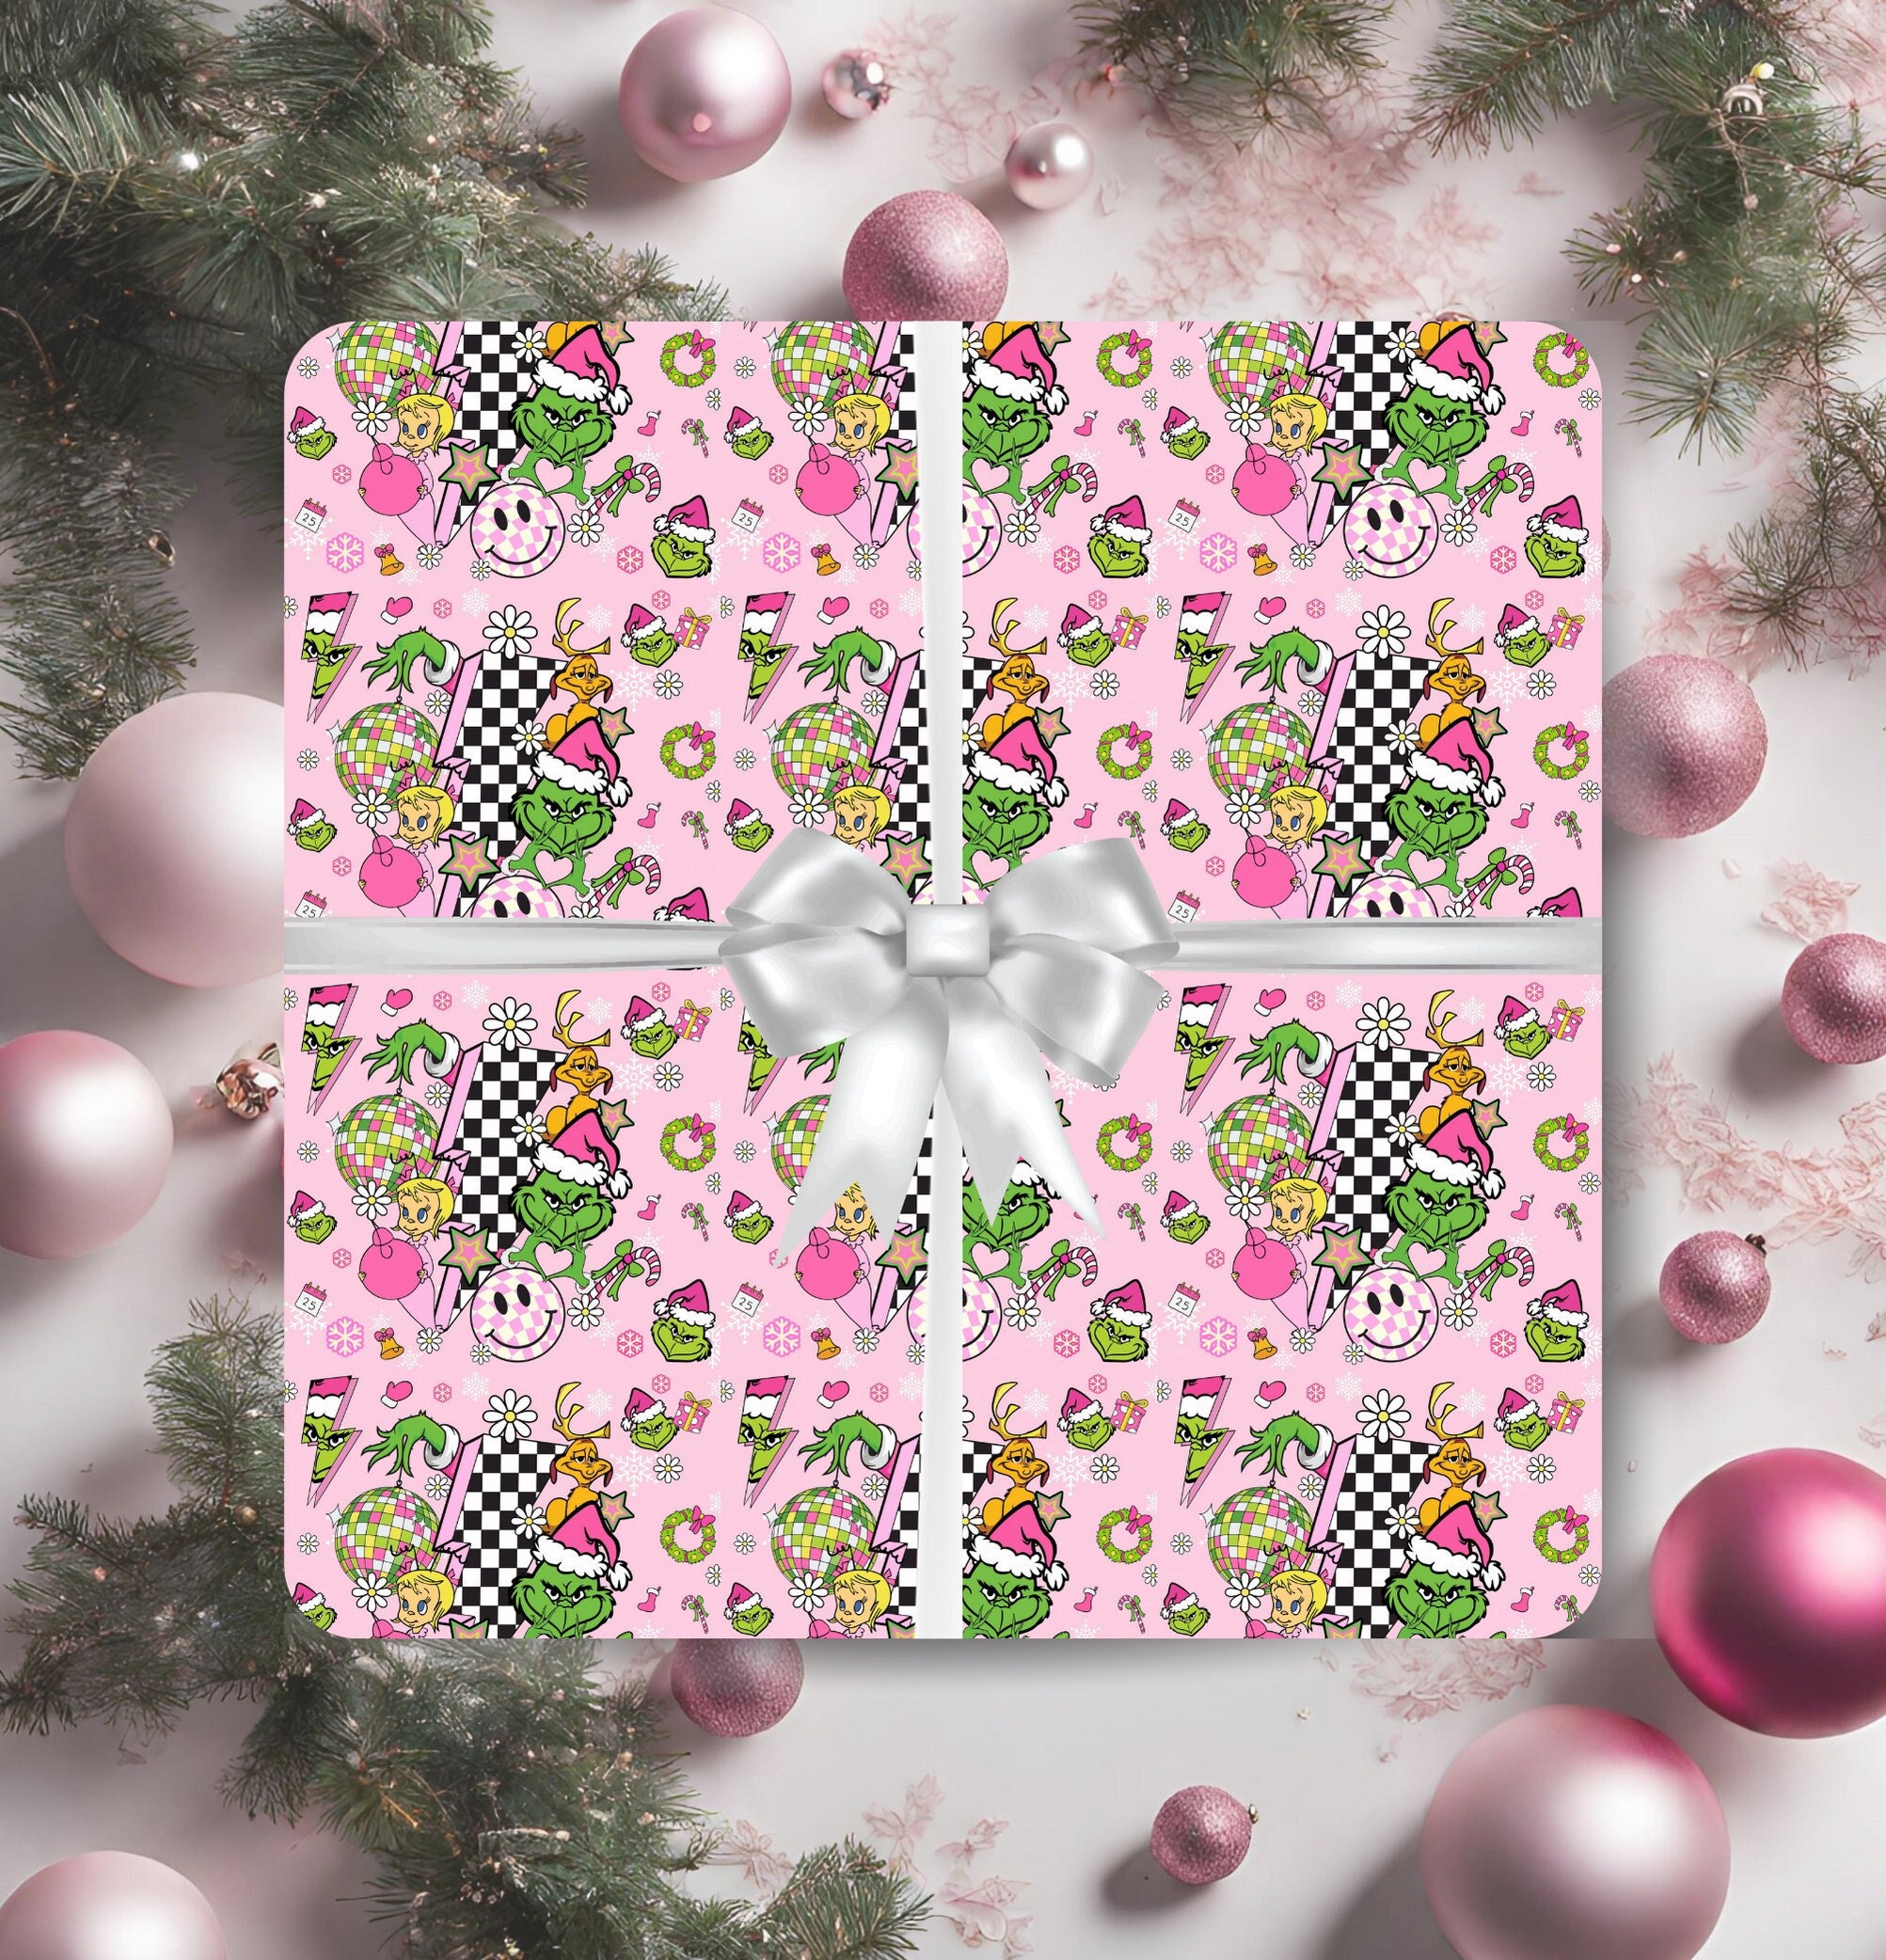 Green and Pink Christmas Gift Wrap Ideas - Persia Lou